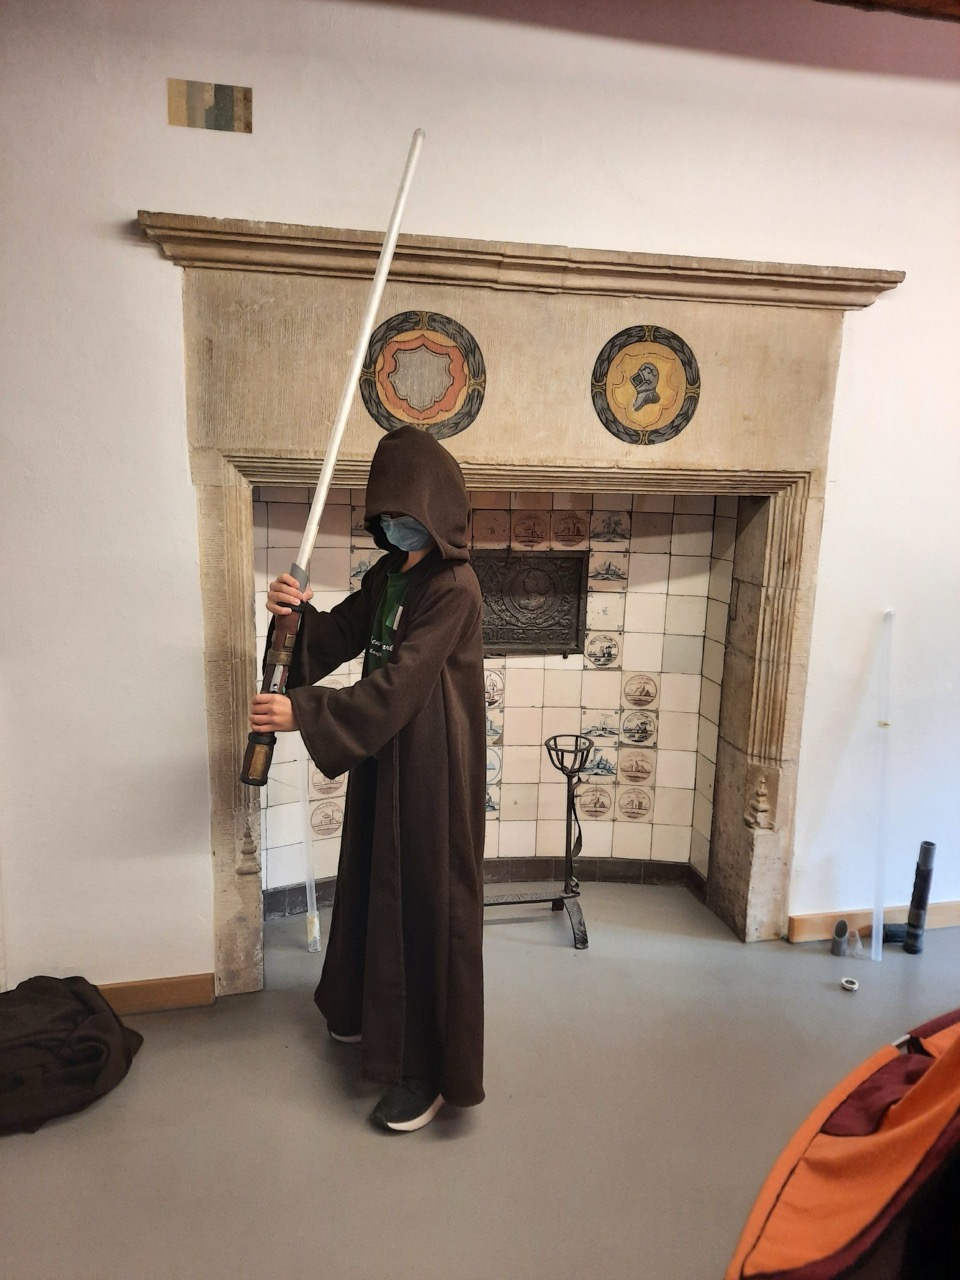 A star warrior with a self-sewn cowl and lightsaber at the zdi holiday course in the zdi network in the district of Coesfeld.